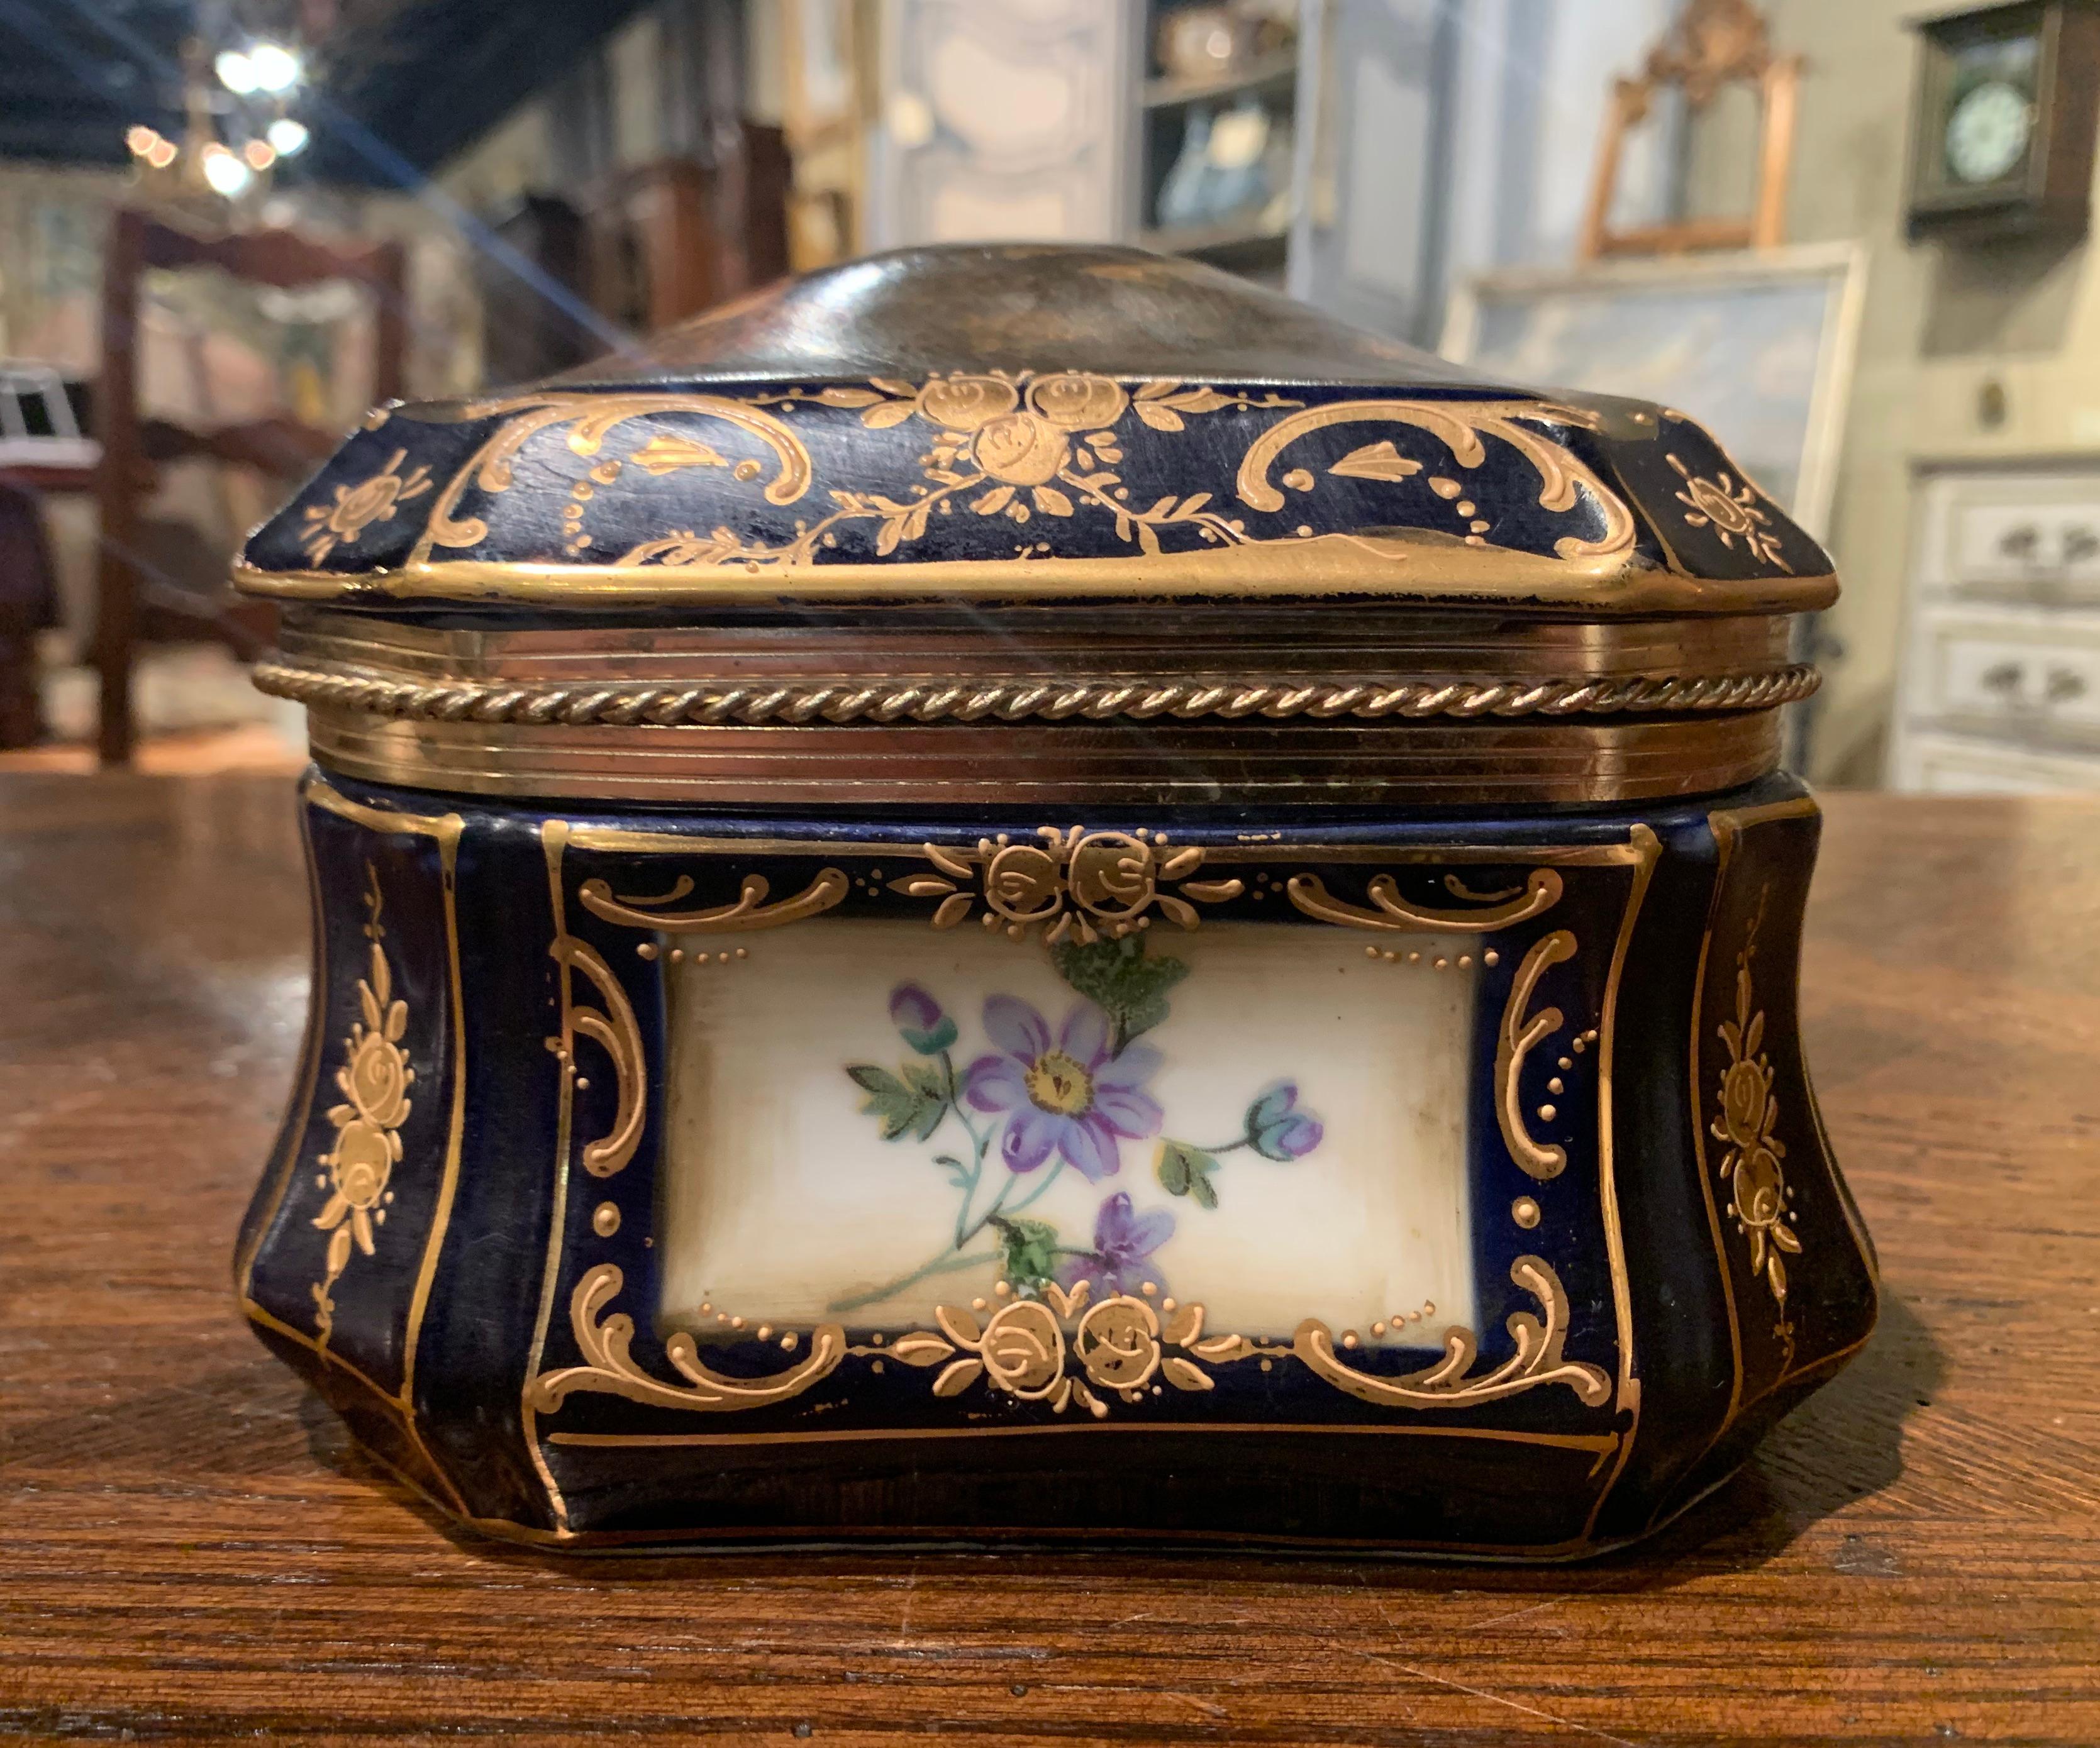 19th Century French Sèvres Painted Porcelain and Gilt Brass Casket Jewelry Box 4